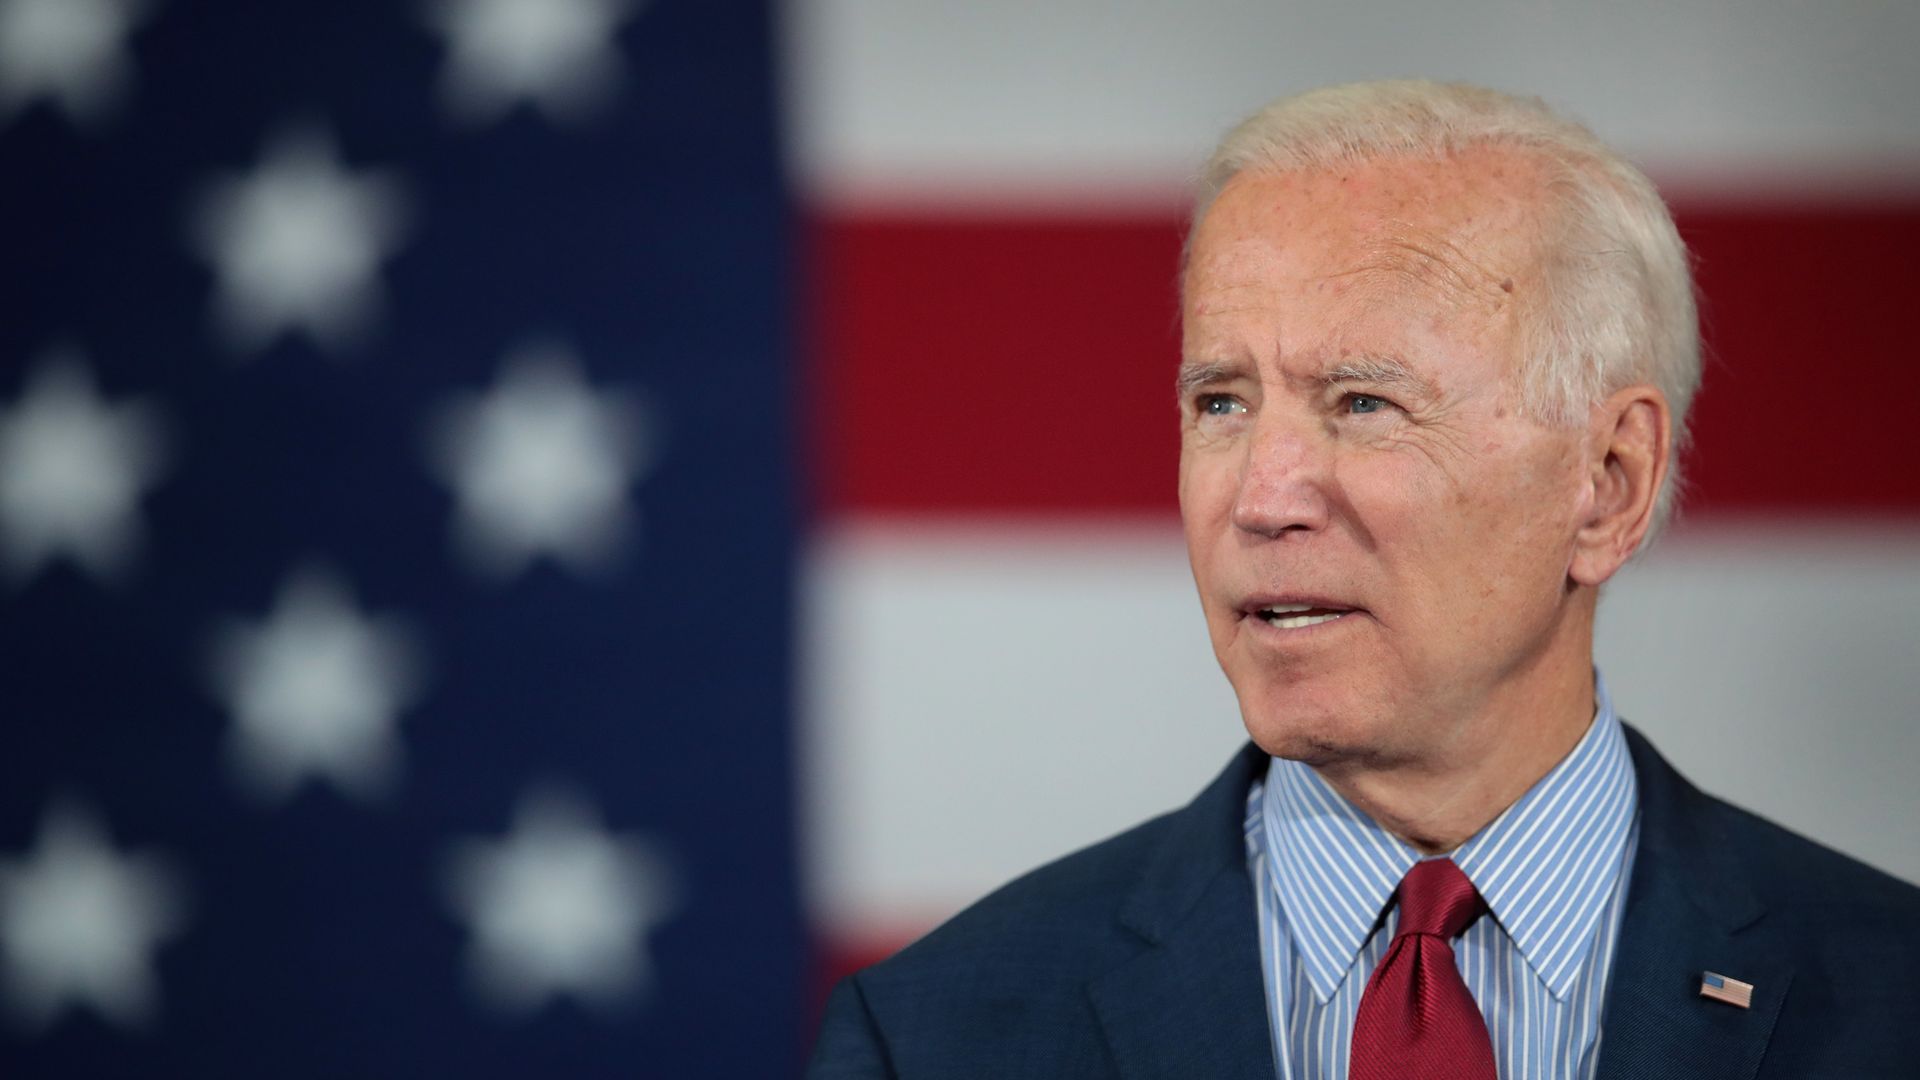 Democratic Presidential candidate former vice president Joe Biden speaks to guests during a campaign stop at the RiverCenter on October 16, 2019 in Davenport, Iowa. 